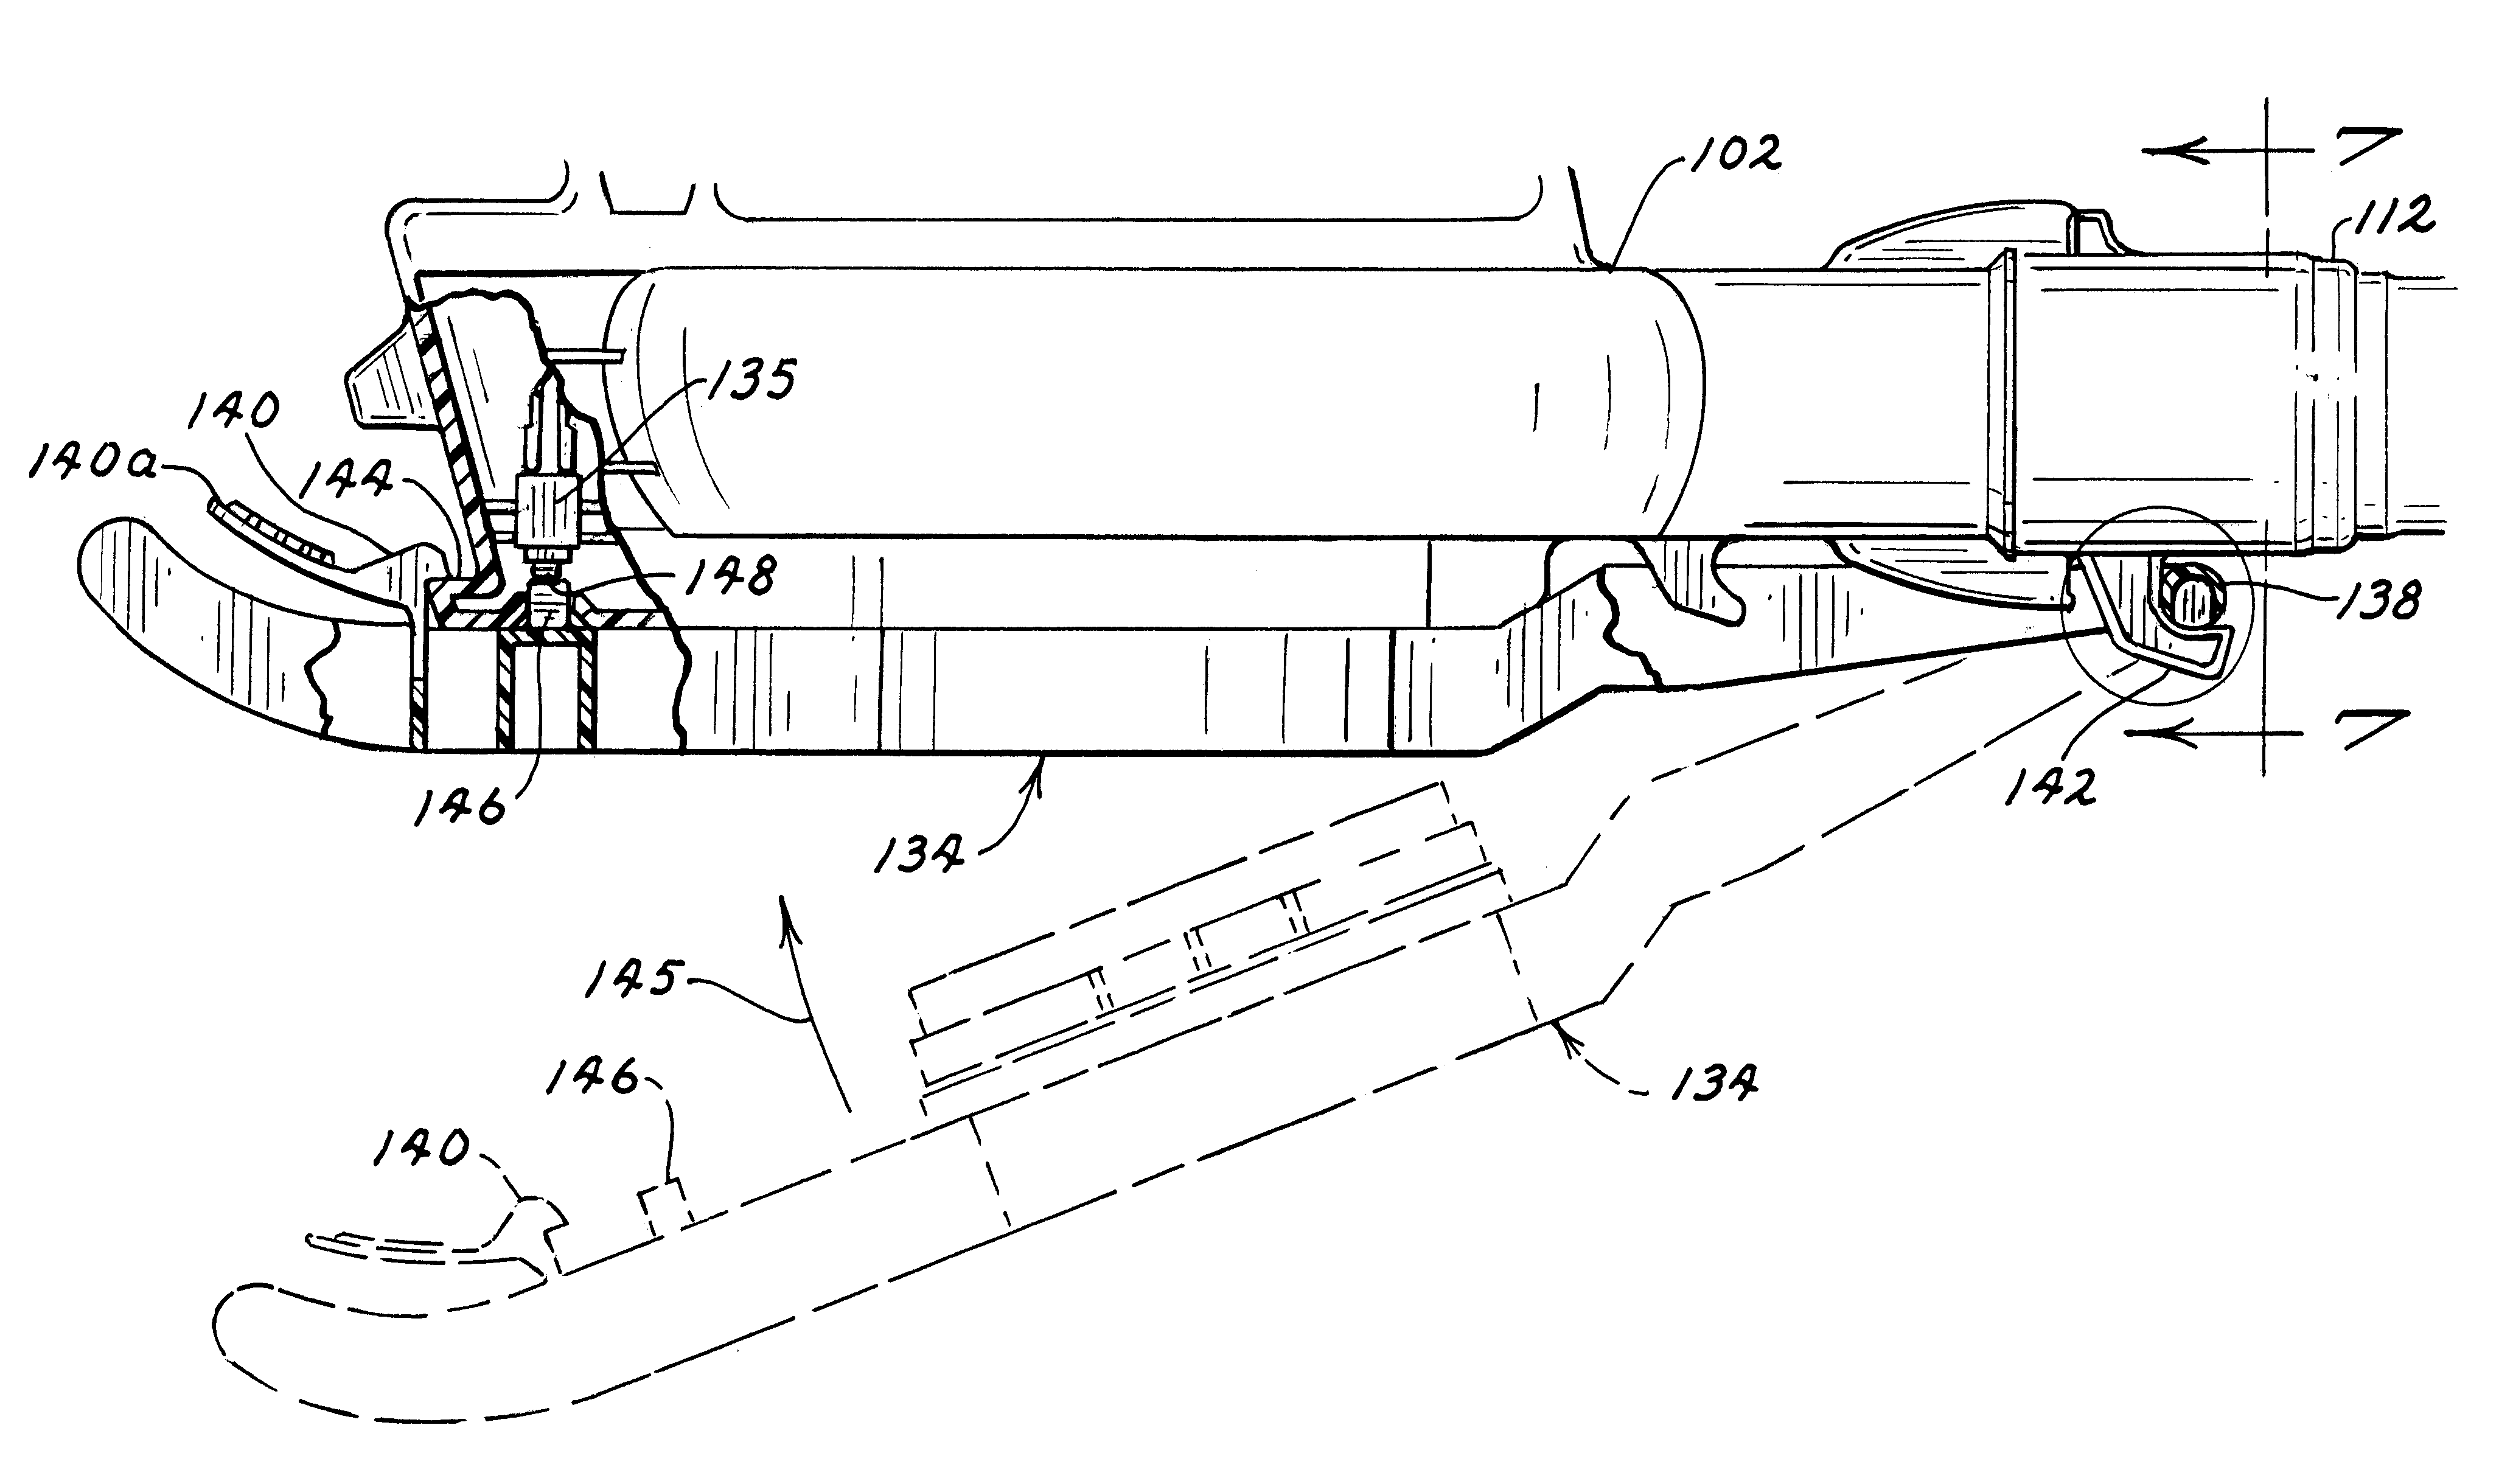 Portable blower/vacuum having air inlet cover attachable to blower tube